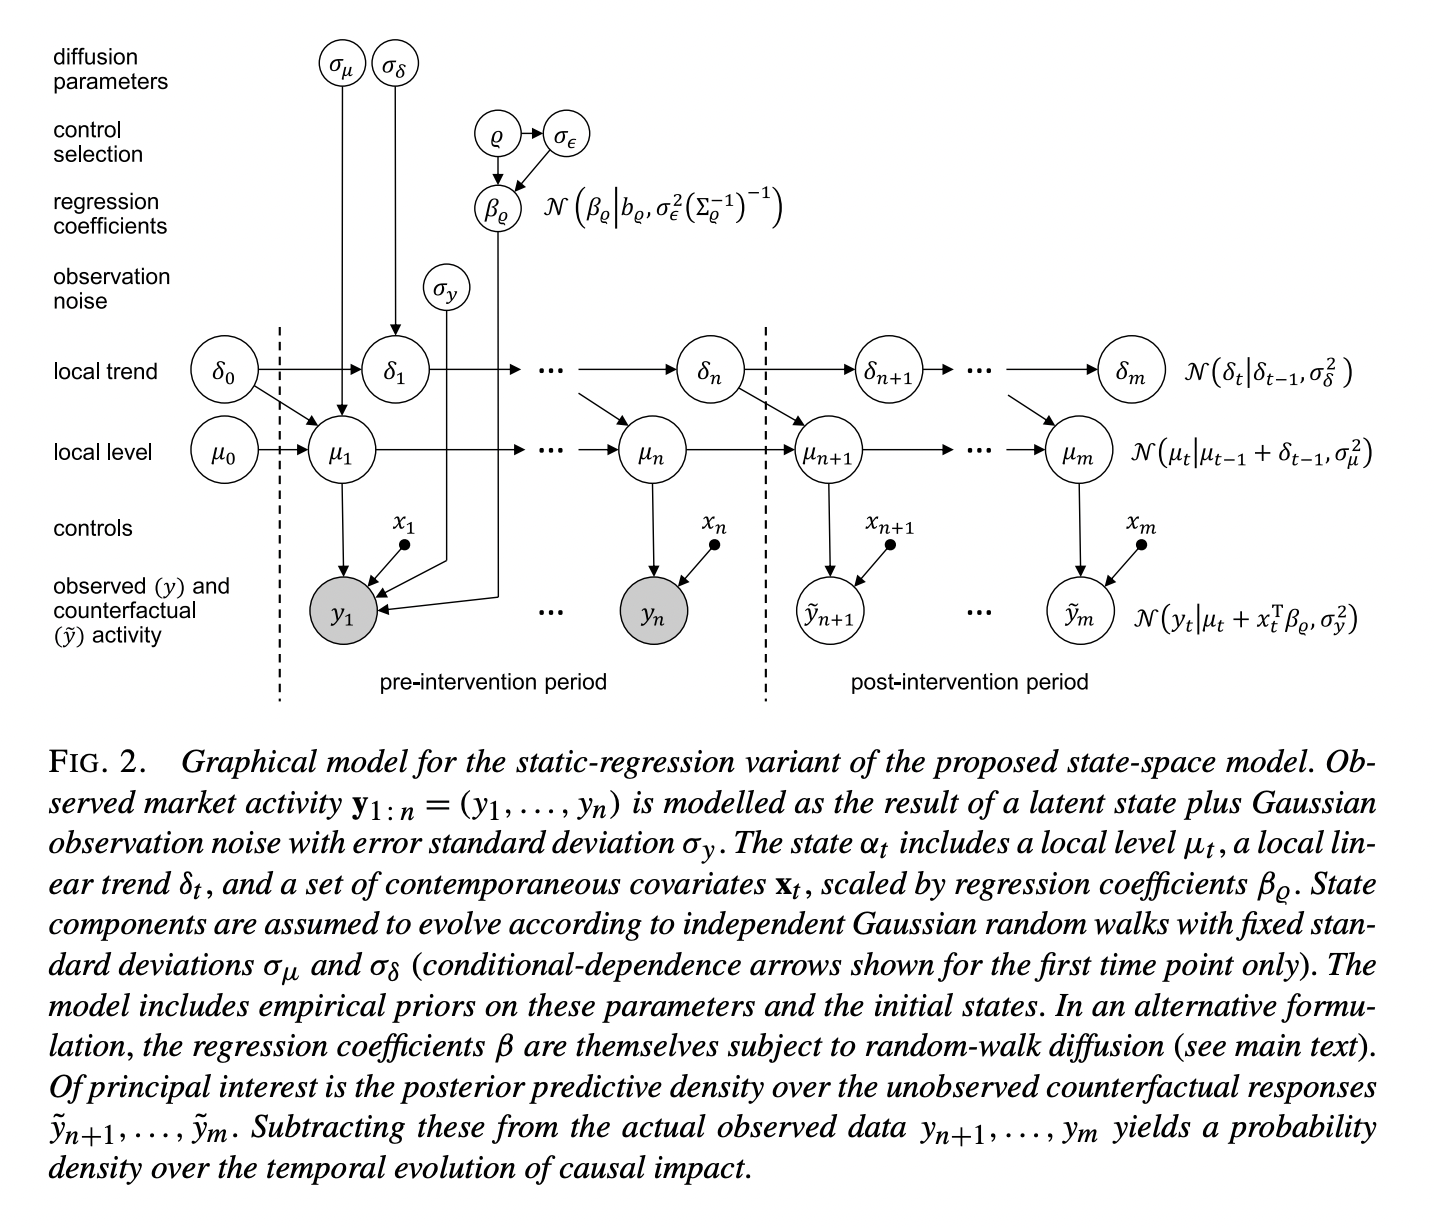 Graphical model of the state-space model used in the Causal Impact library